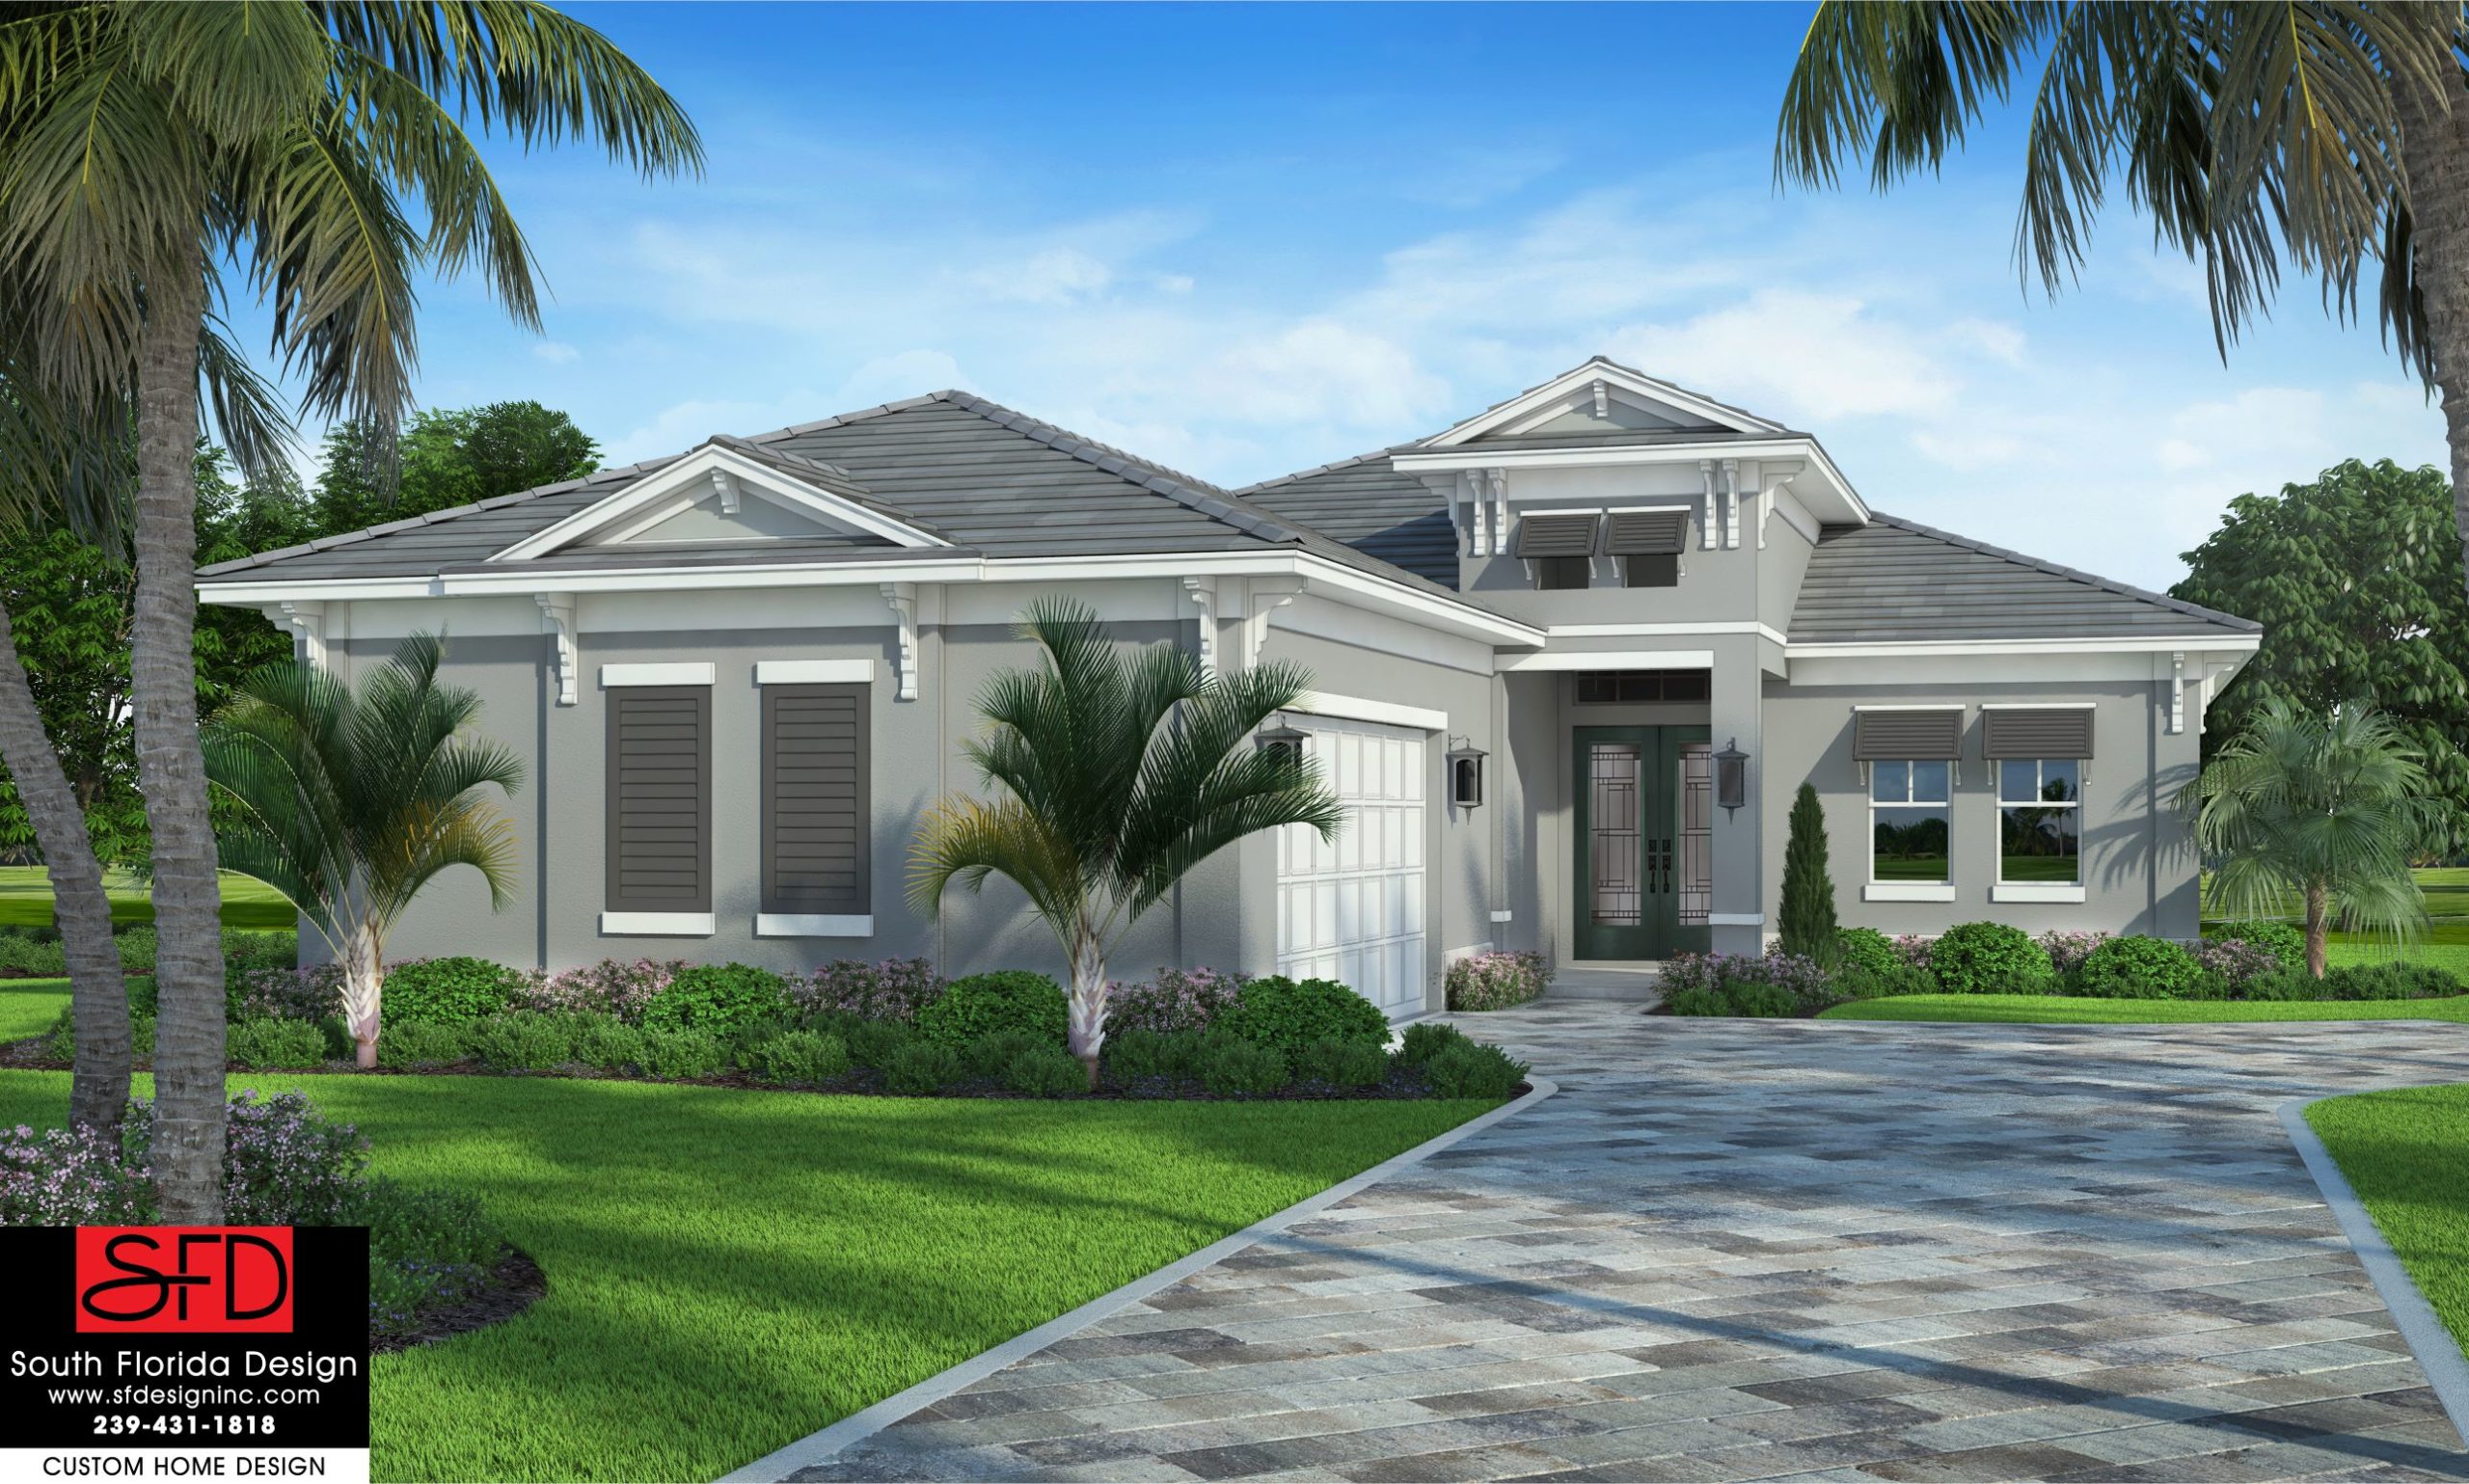 Color front elevation rendering of a 1-story narrow lot house plan